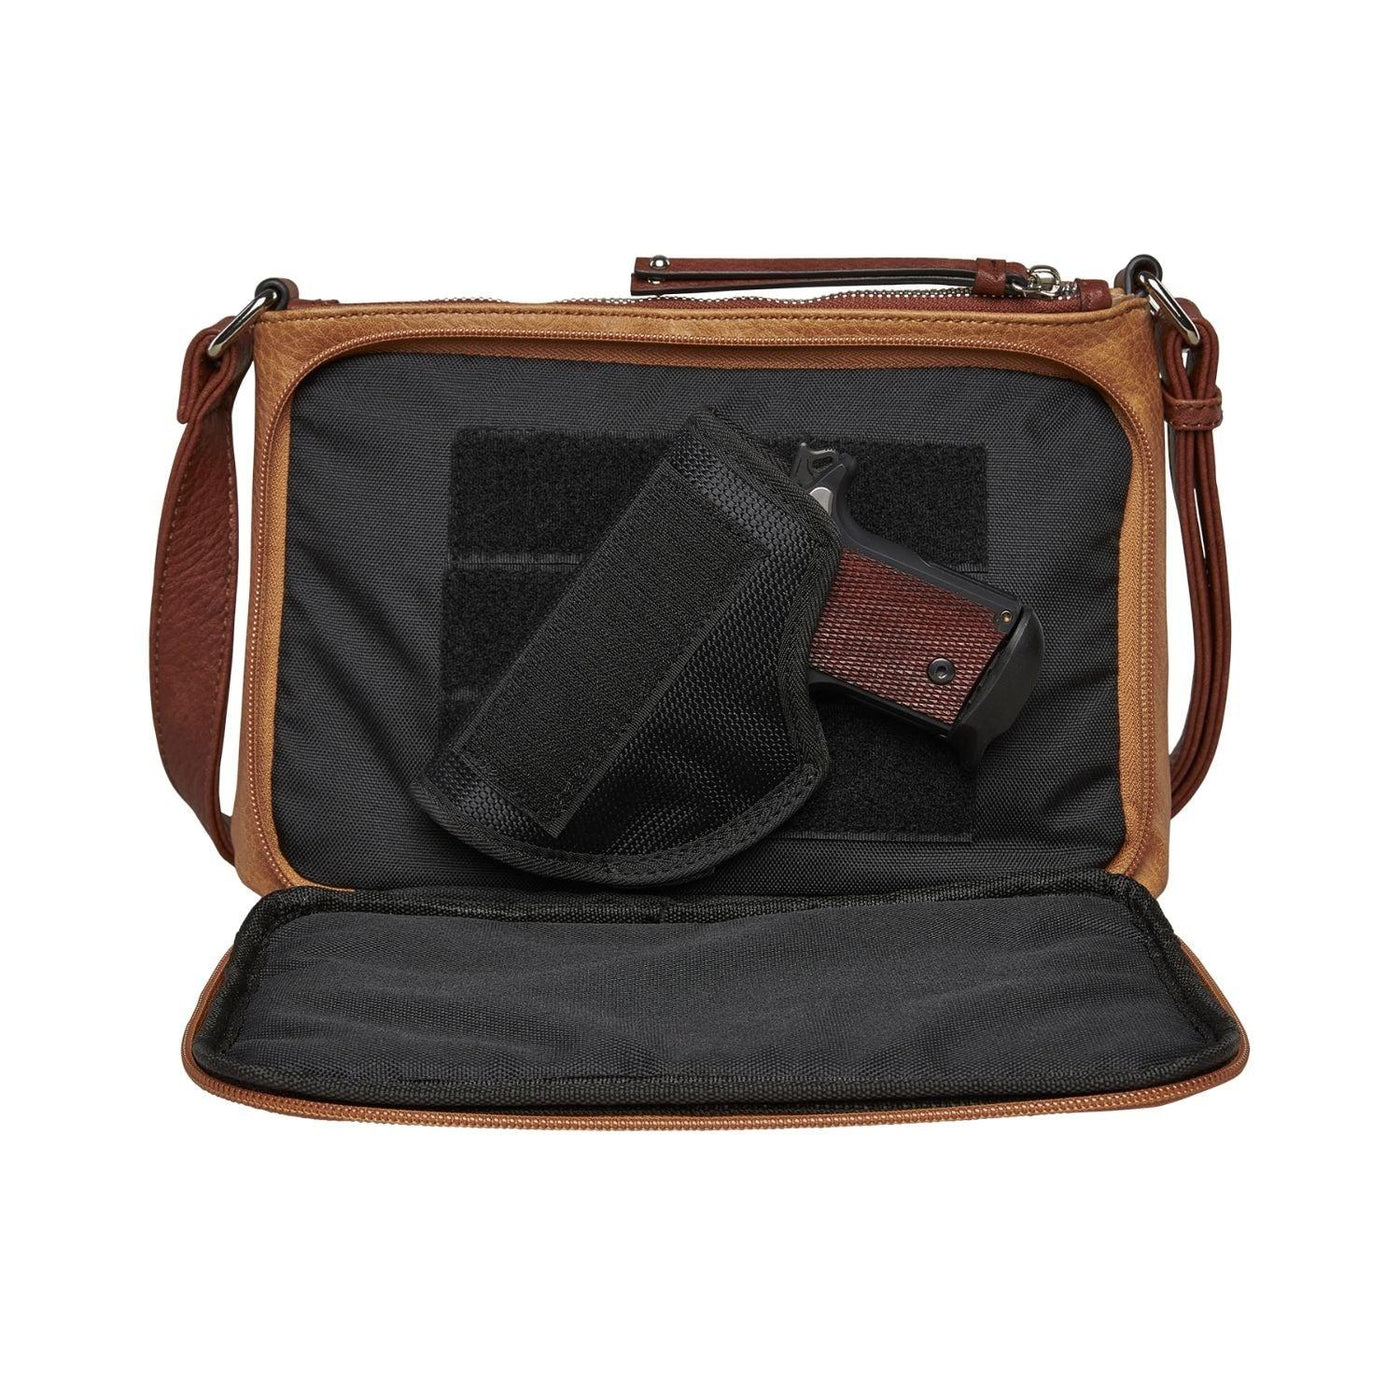 Concealed Carry Hailey Crossbody -  Lady Conceal -  soft leather shoulder bags for women's -  crossbody bags for everyday use -  most popular crossbody bag -  crossbody bags for guns -  crossbody handgun bag -  Unique Hide Purse -  Conceal Carry Western Purse -  Stylish Carry Evelyn Leather Bag -  Bag for Conceal Carrying Women - -  Gun Bag for Women